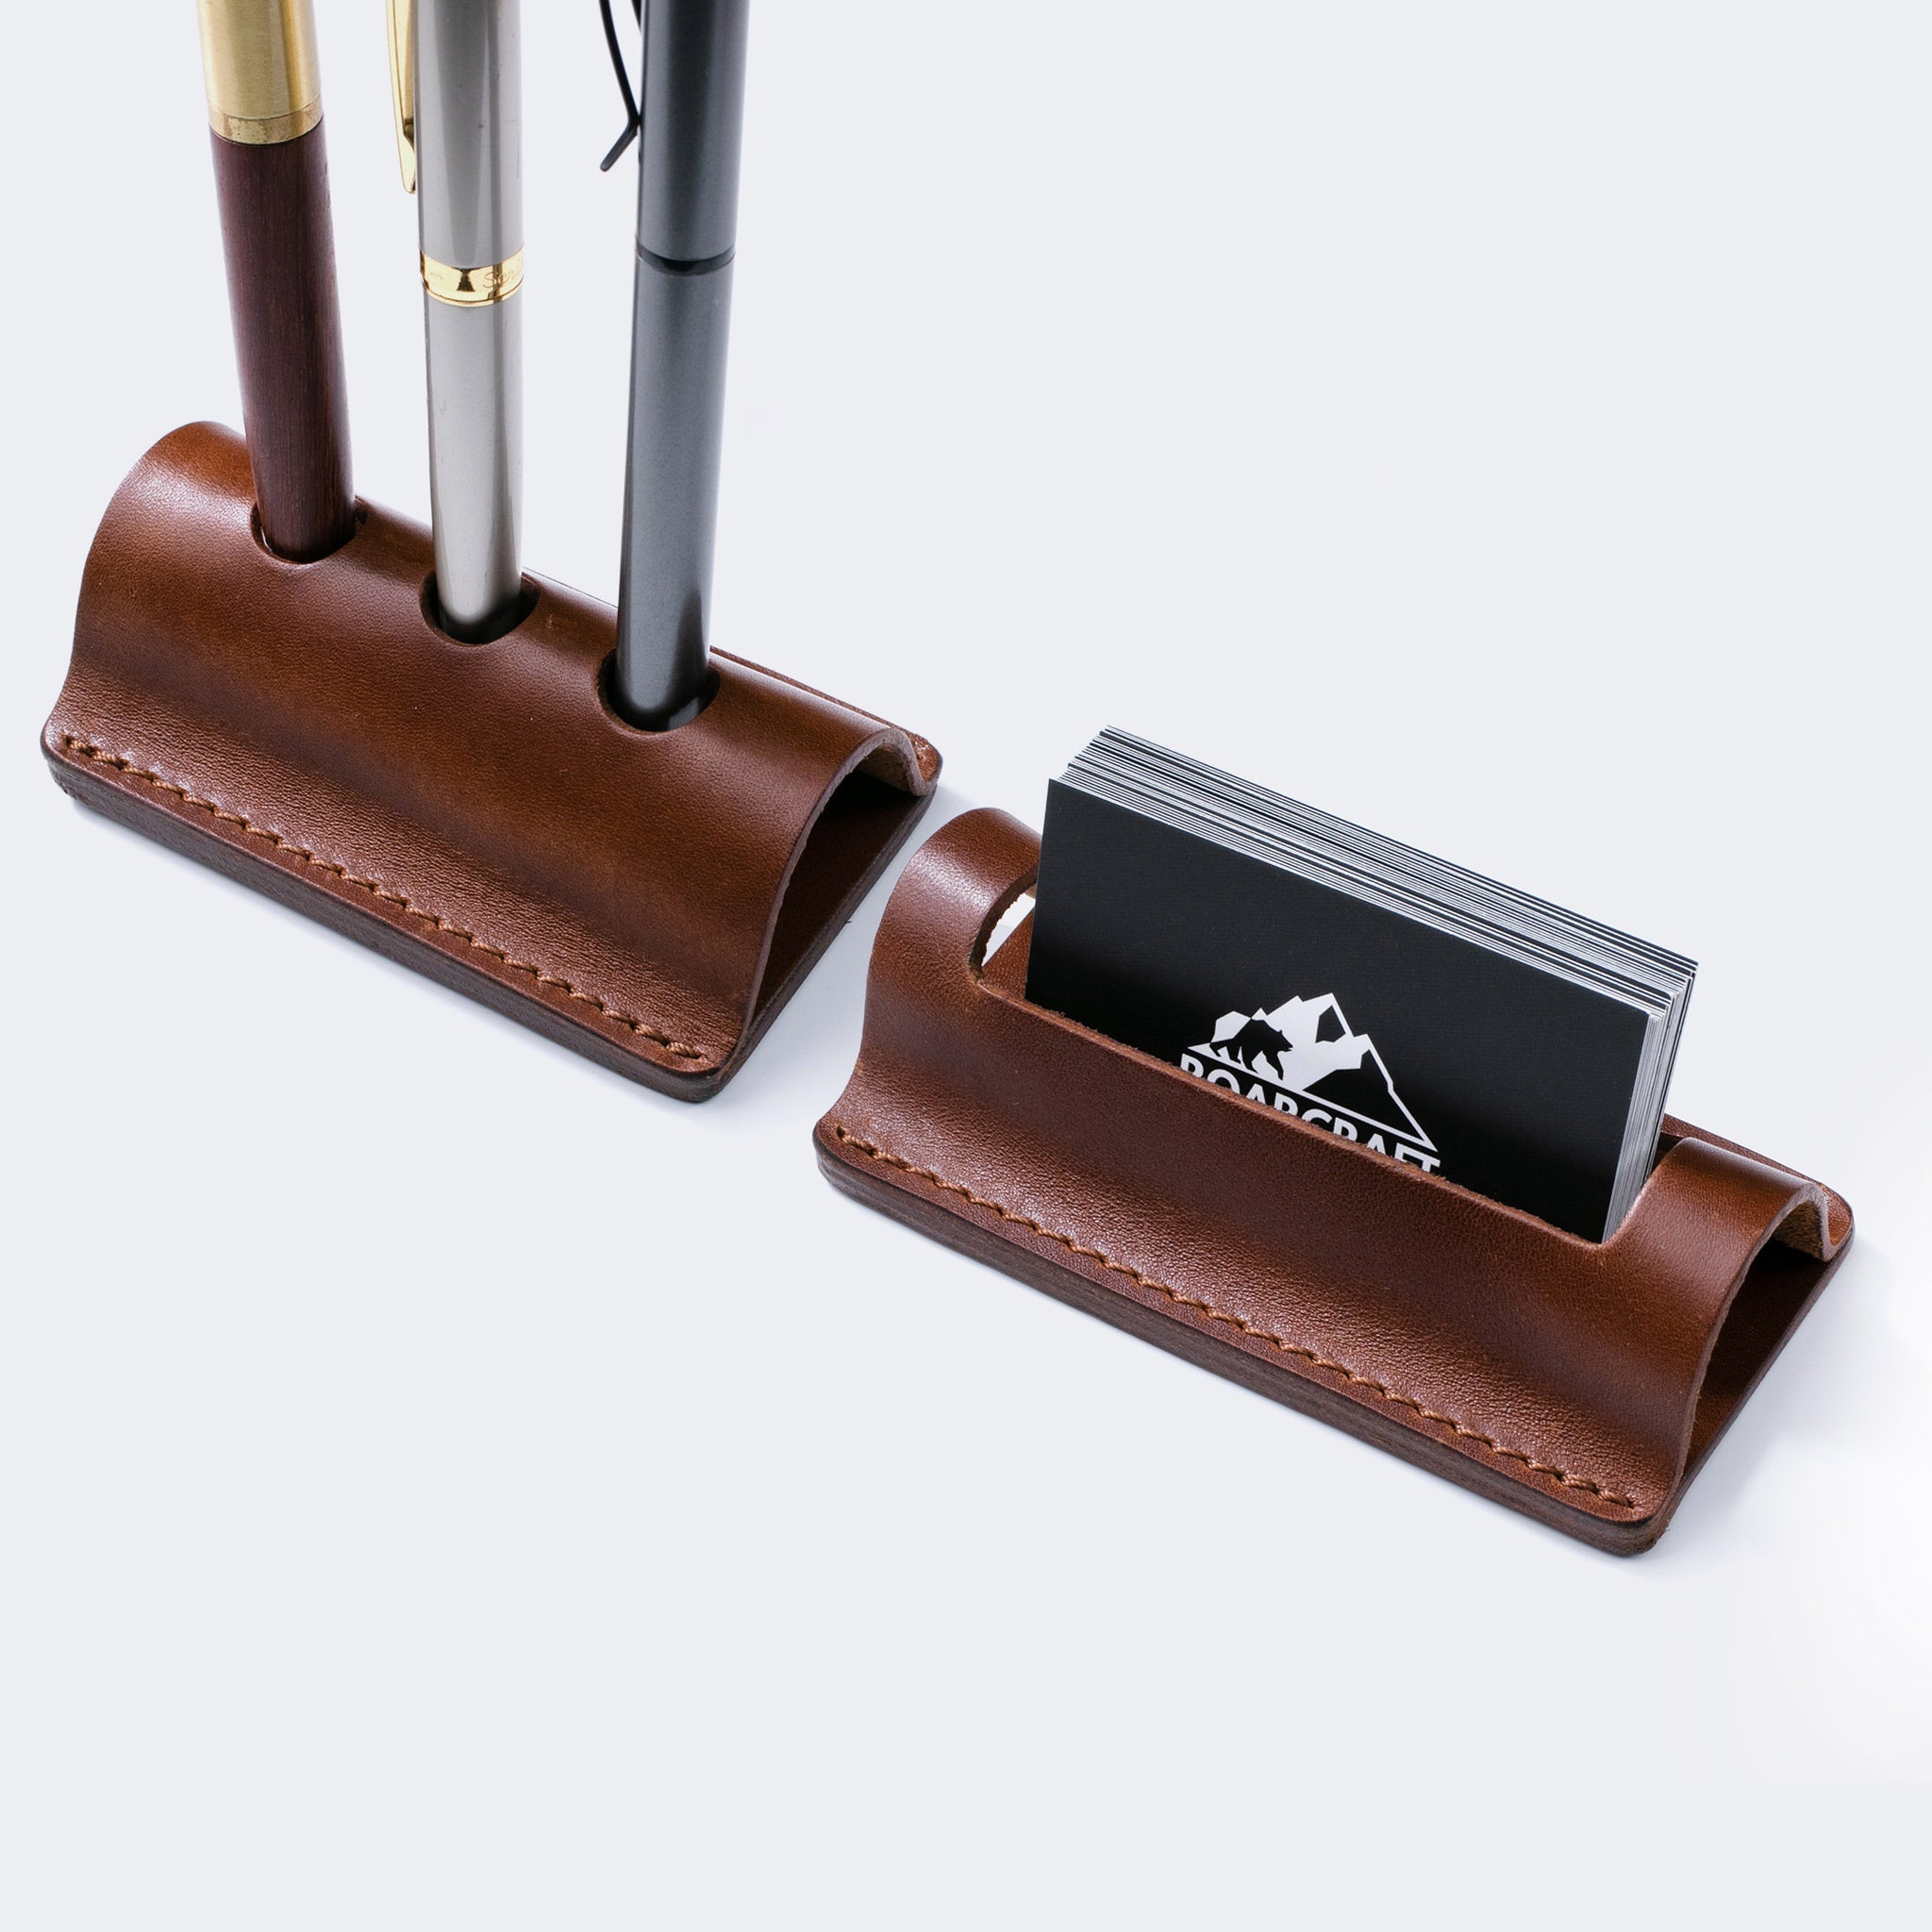 Pen and Business Card Leather Stands - Set of 2